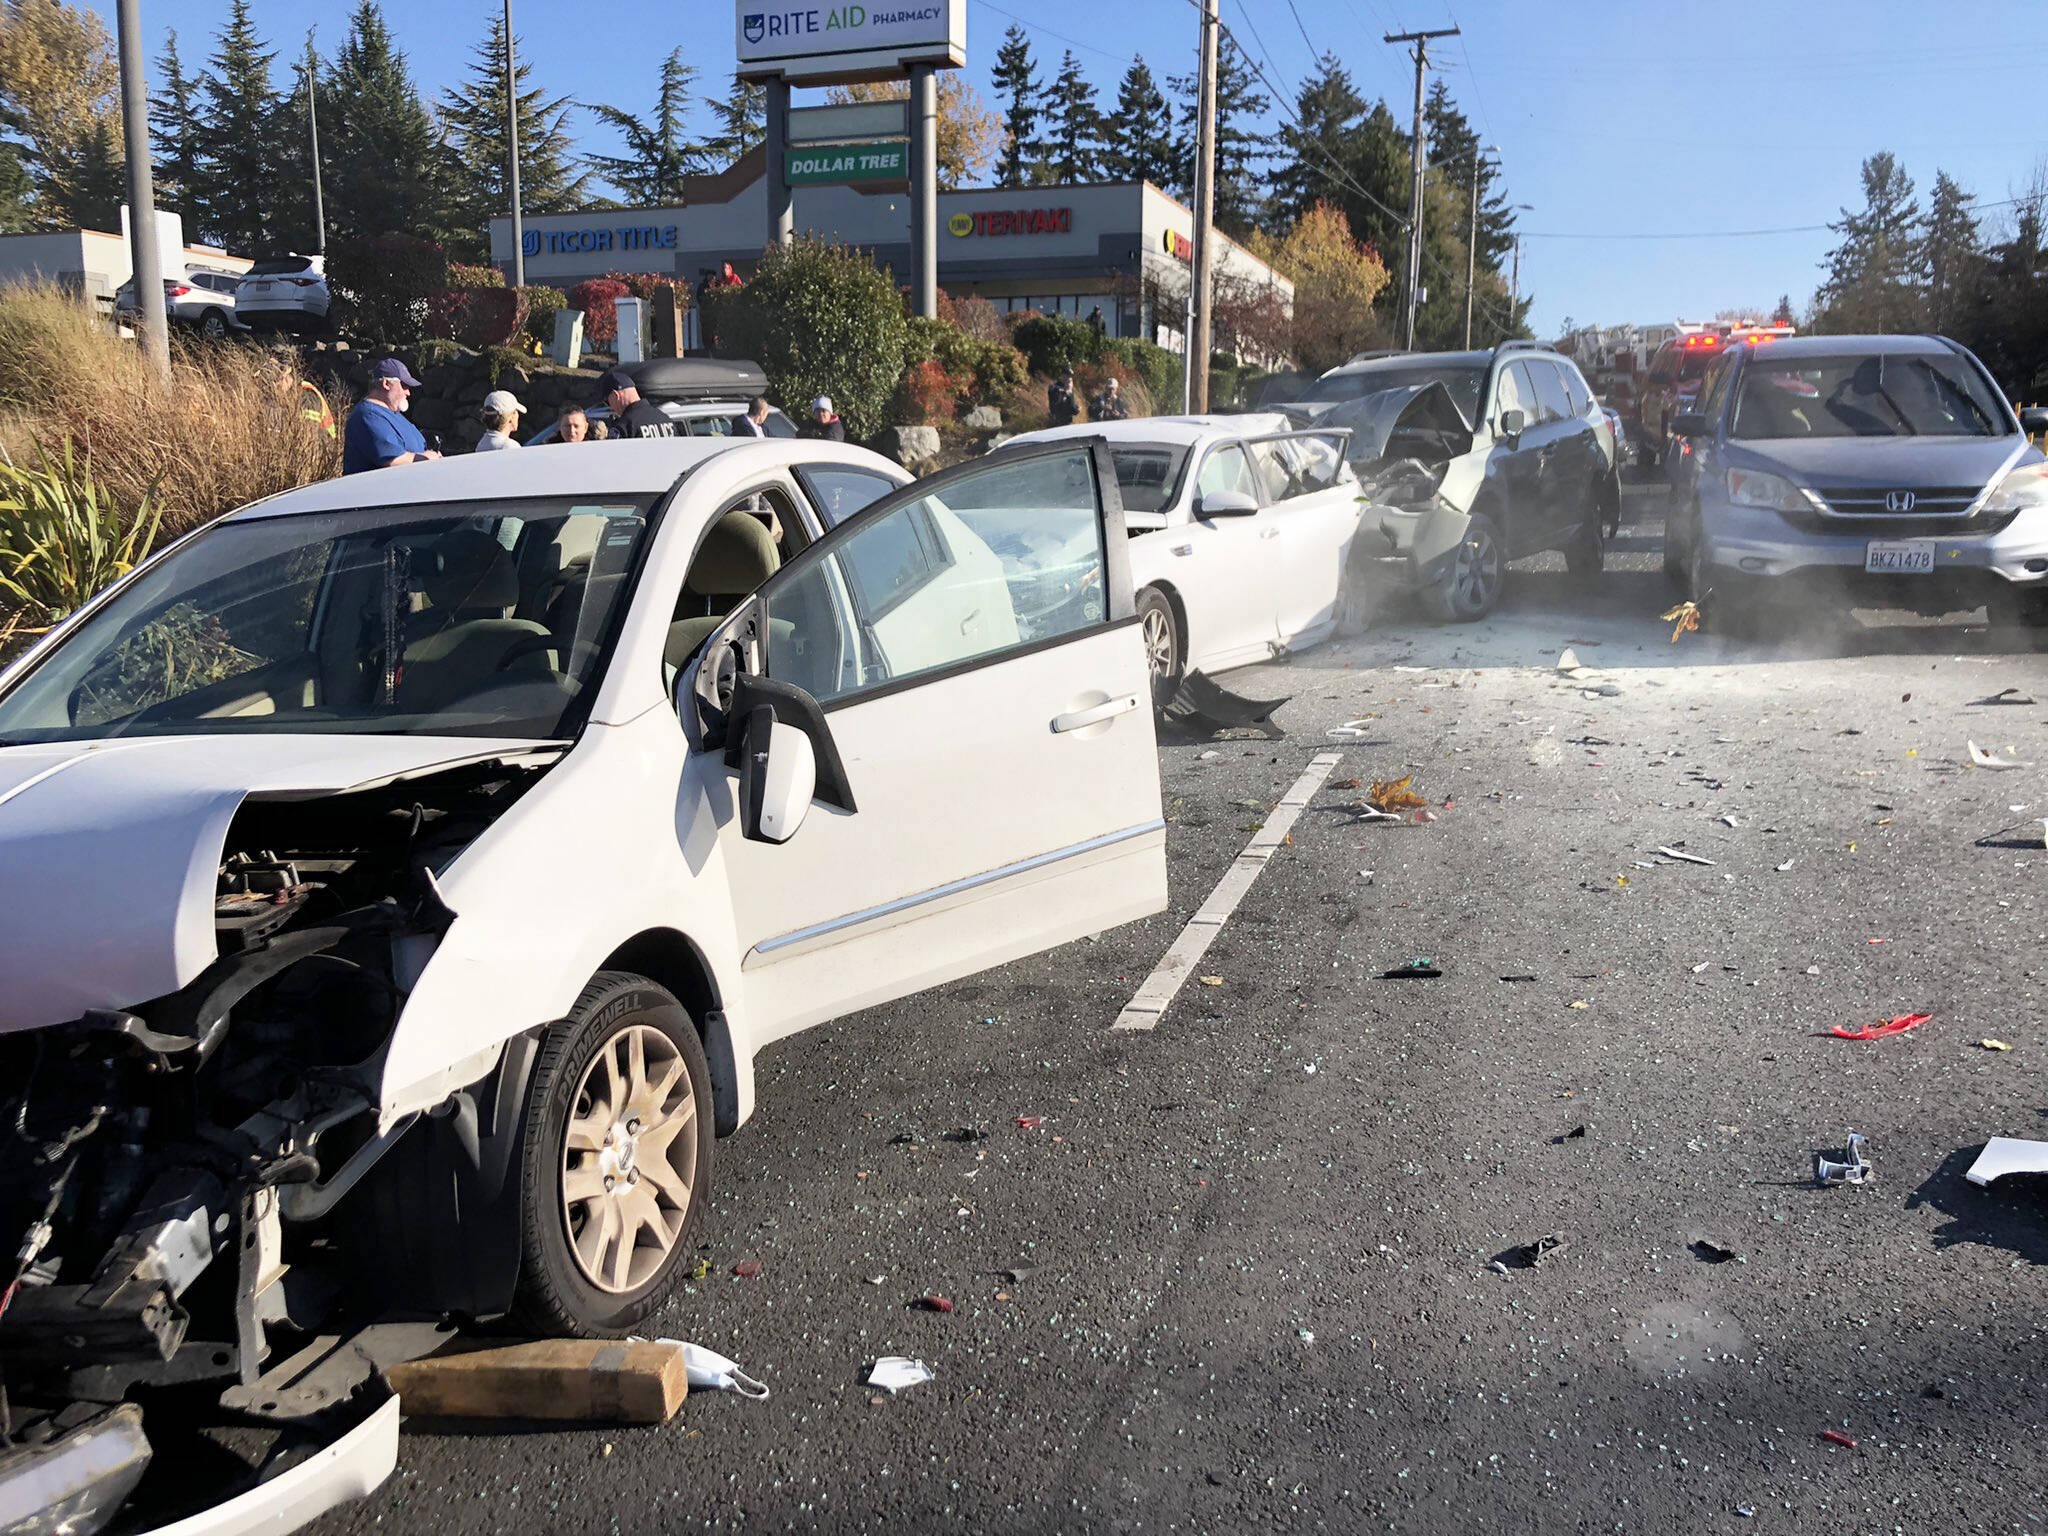 Two people were injured in a six-vehicle crash Thursday morning, Nov. 17 in Kent at the intersection of Southeast 208th Street and 108th Avenue SE. COURTESY PHOTO, Puget Sound Fire